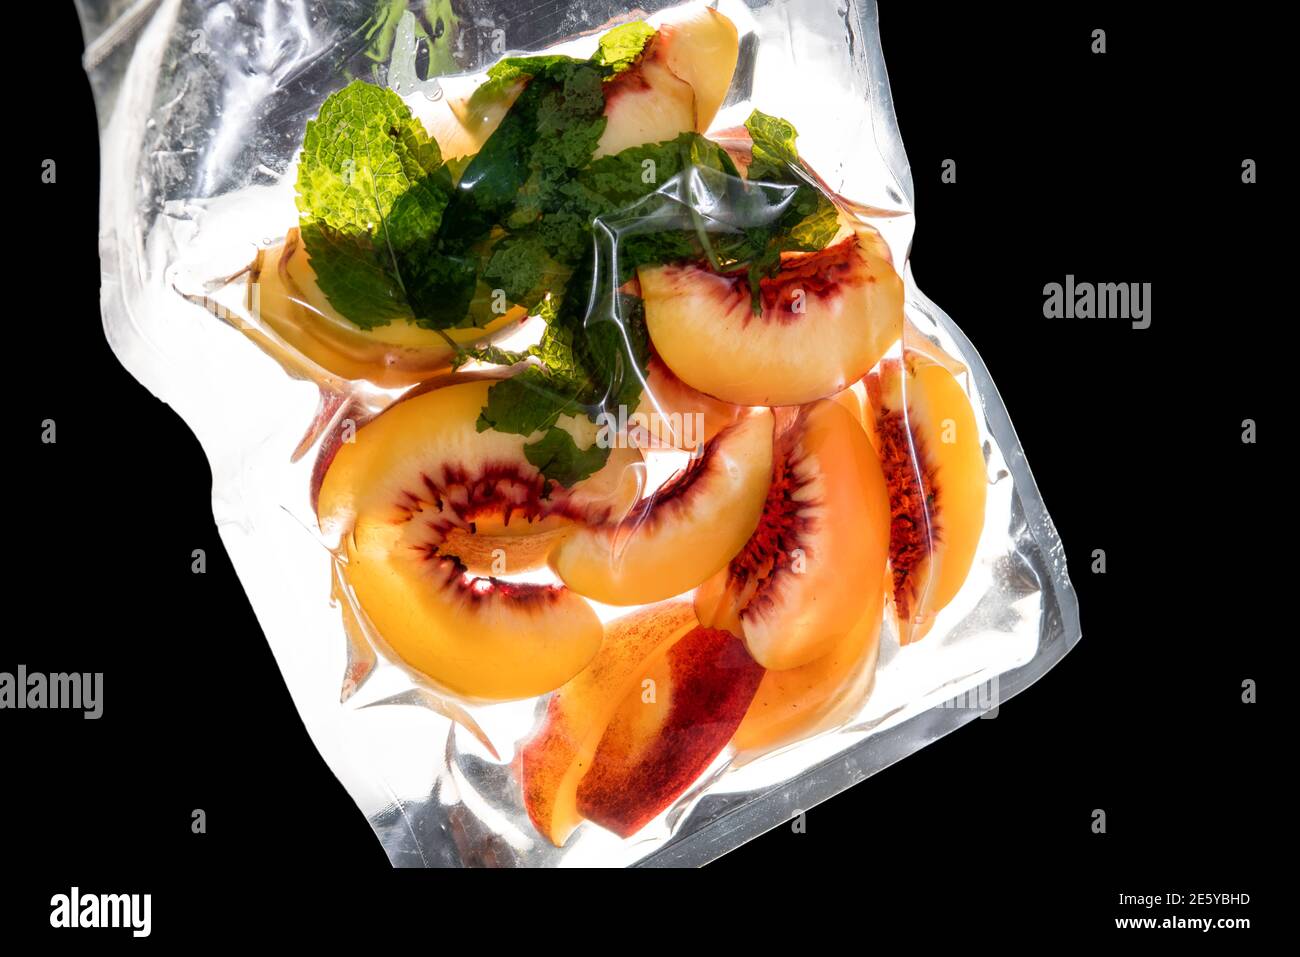 peach slices with mint leaves vacuum packed sealed for sous vide cooking.backlight on black background Stock Photo